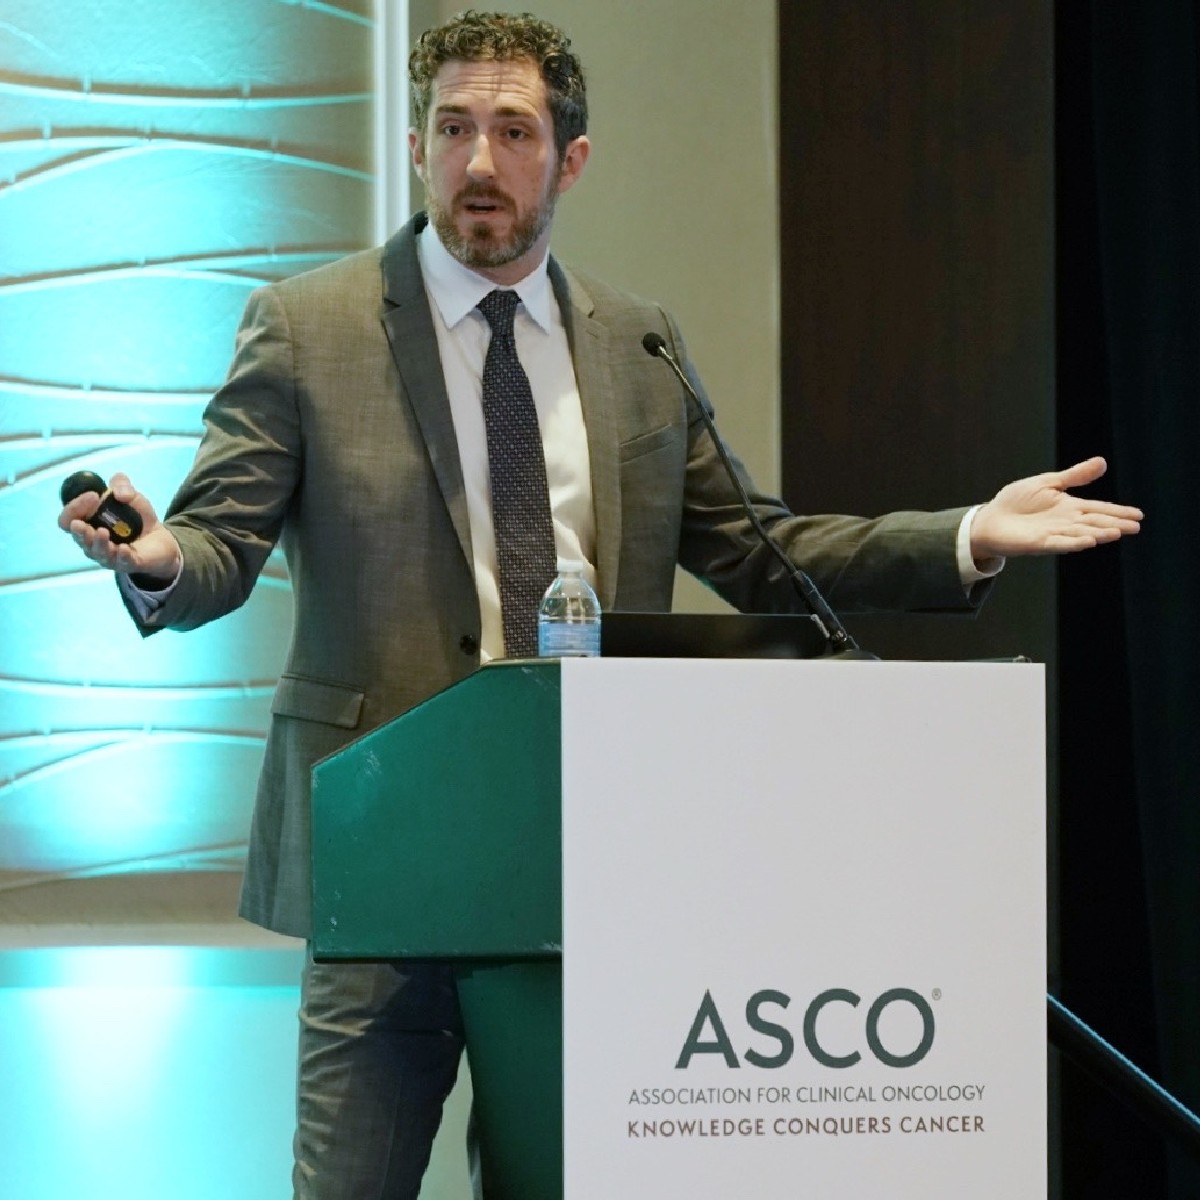 “I recommend we have a robust social media presence to educate...You don’t need thousands of followers...It’s not just 1 person making change, it’s all of us…You’ve already taken 1 step towards making change by being here.” Thx @DGlaucomflecken for coming to #ASCOAdvocacySummit!